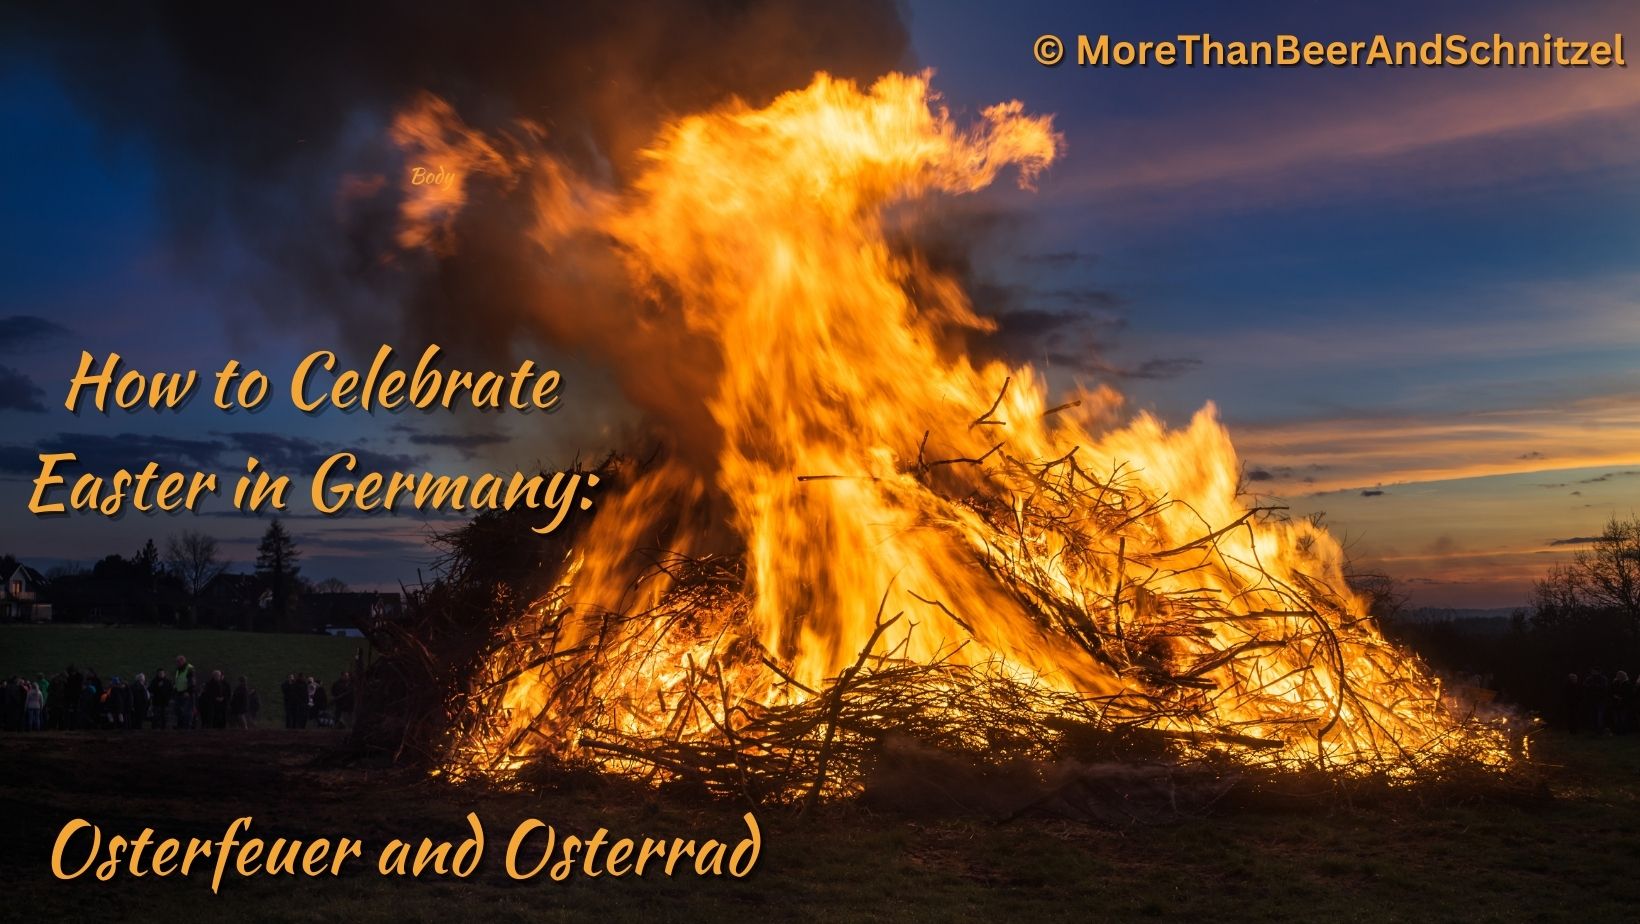 Osterfeuer Easter bonfire with text: How to celebrate Easter in Germany, Osterfeuer and Osterrad